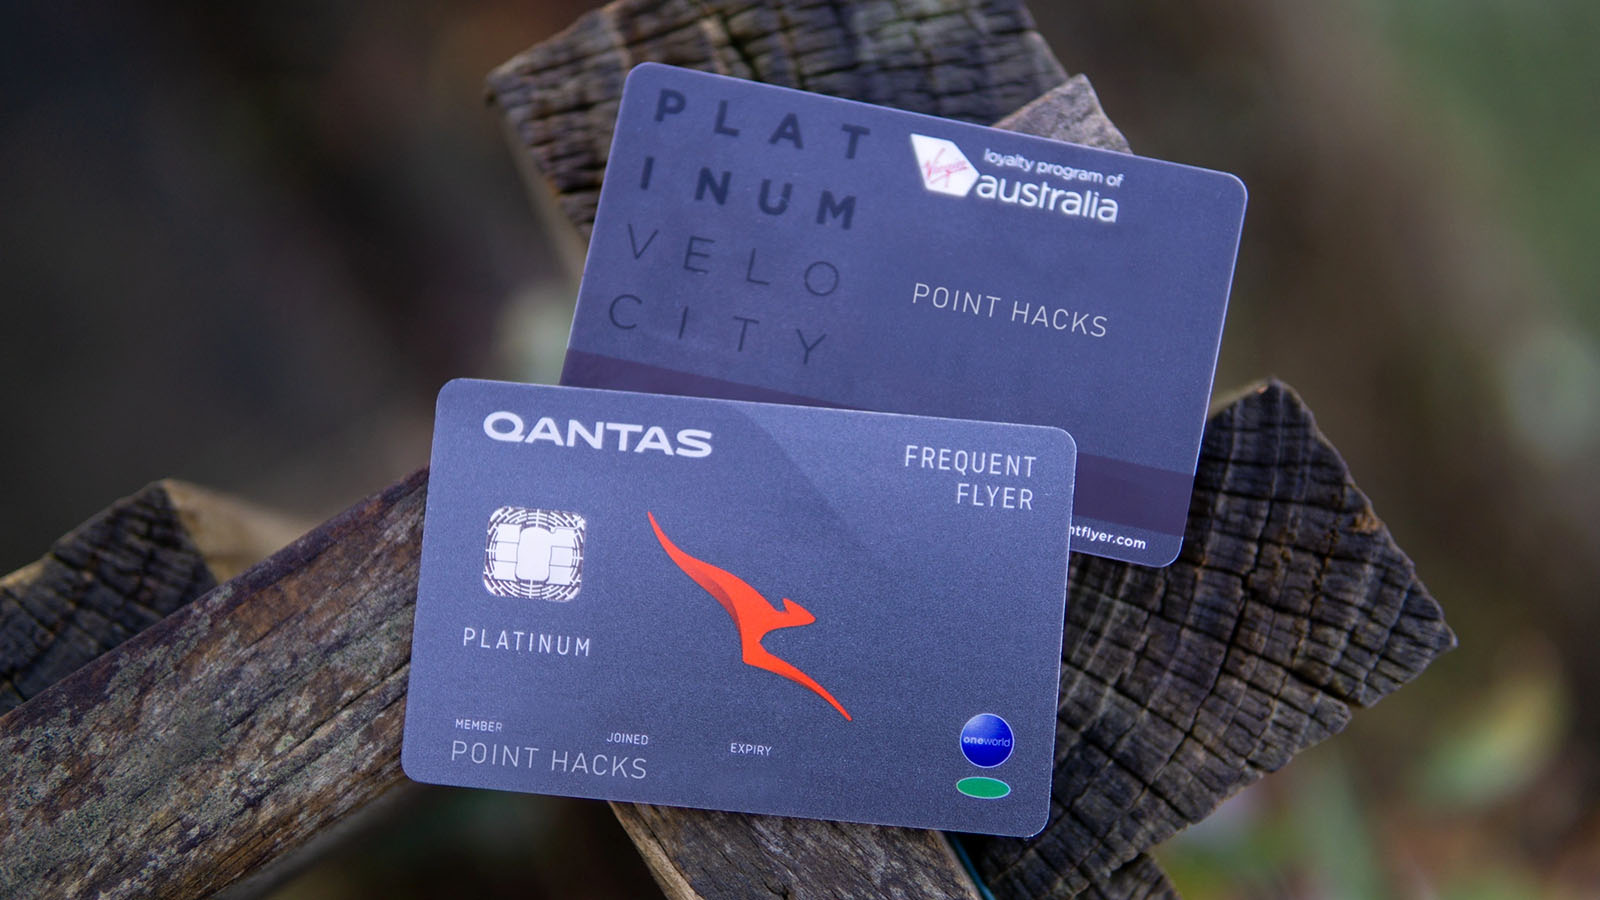 Earning 3,600 Status Credits could give you Platinum with Qantas and Platinum with Velocity.